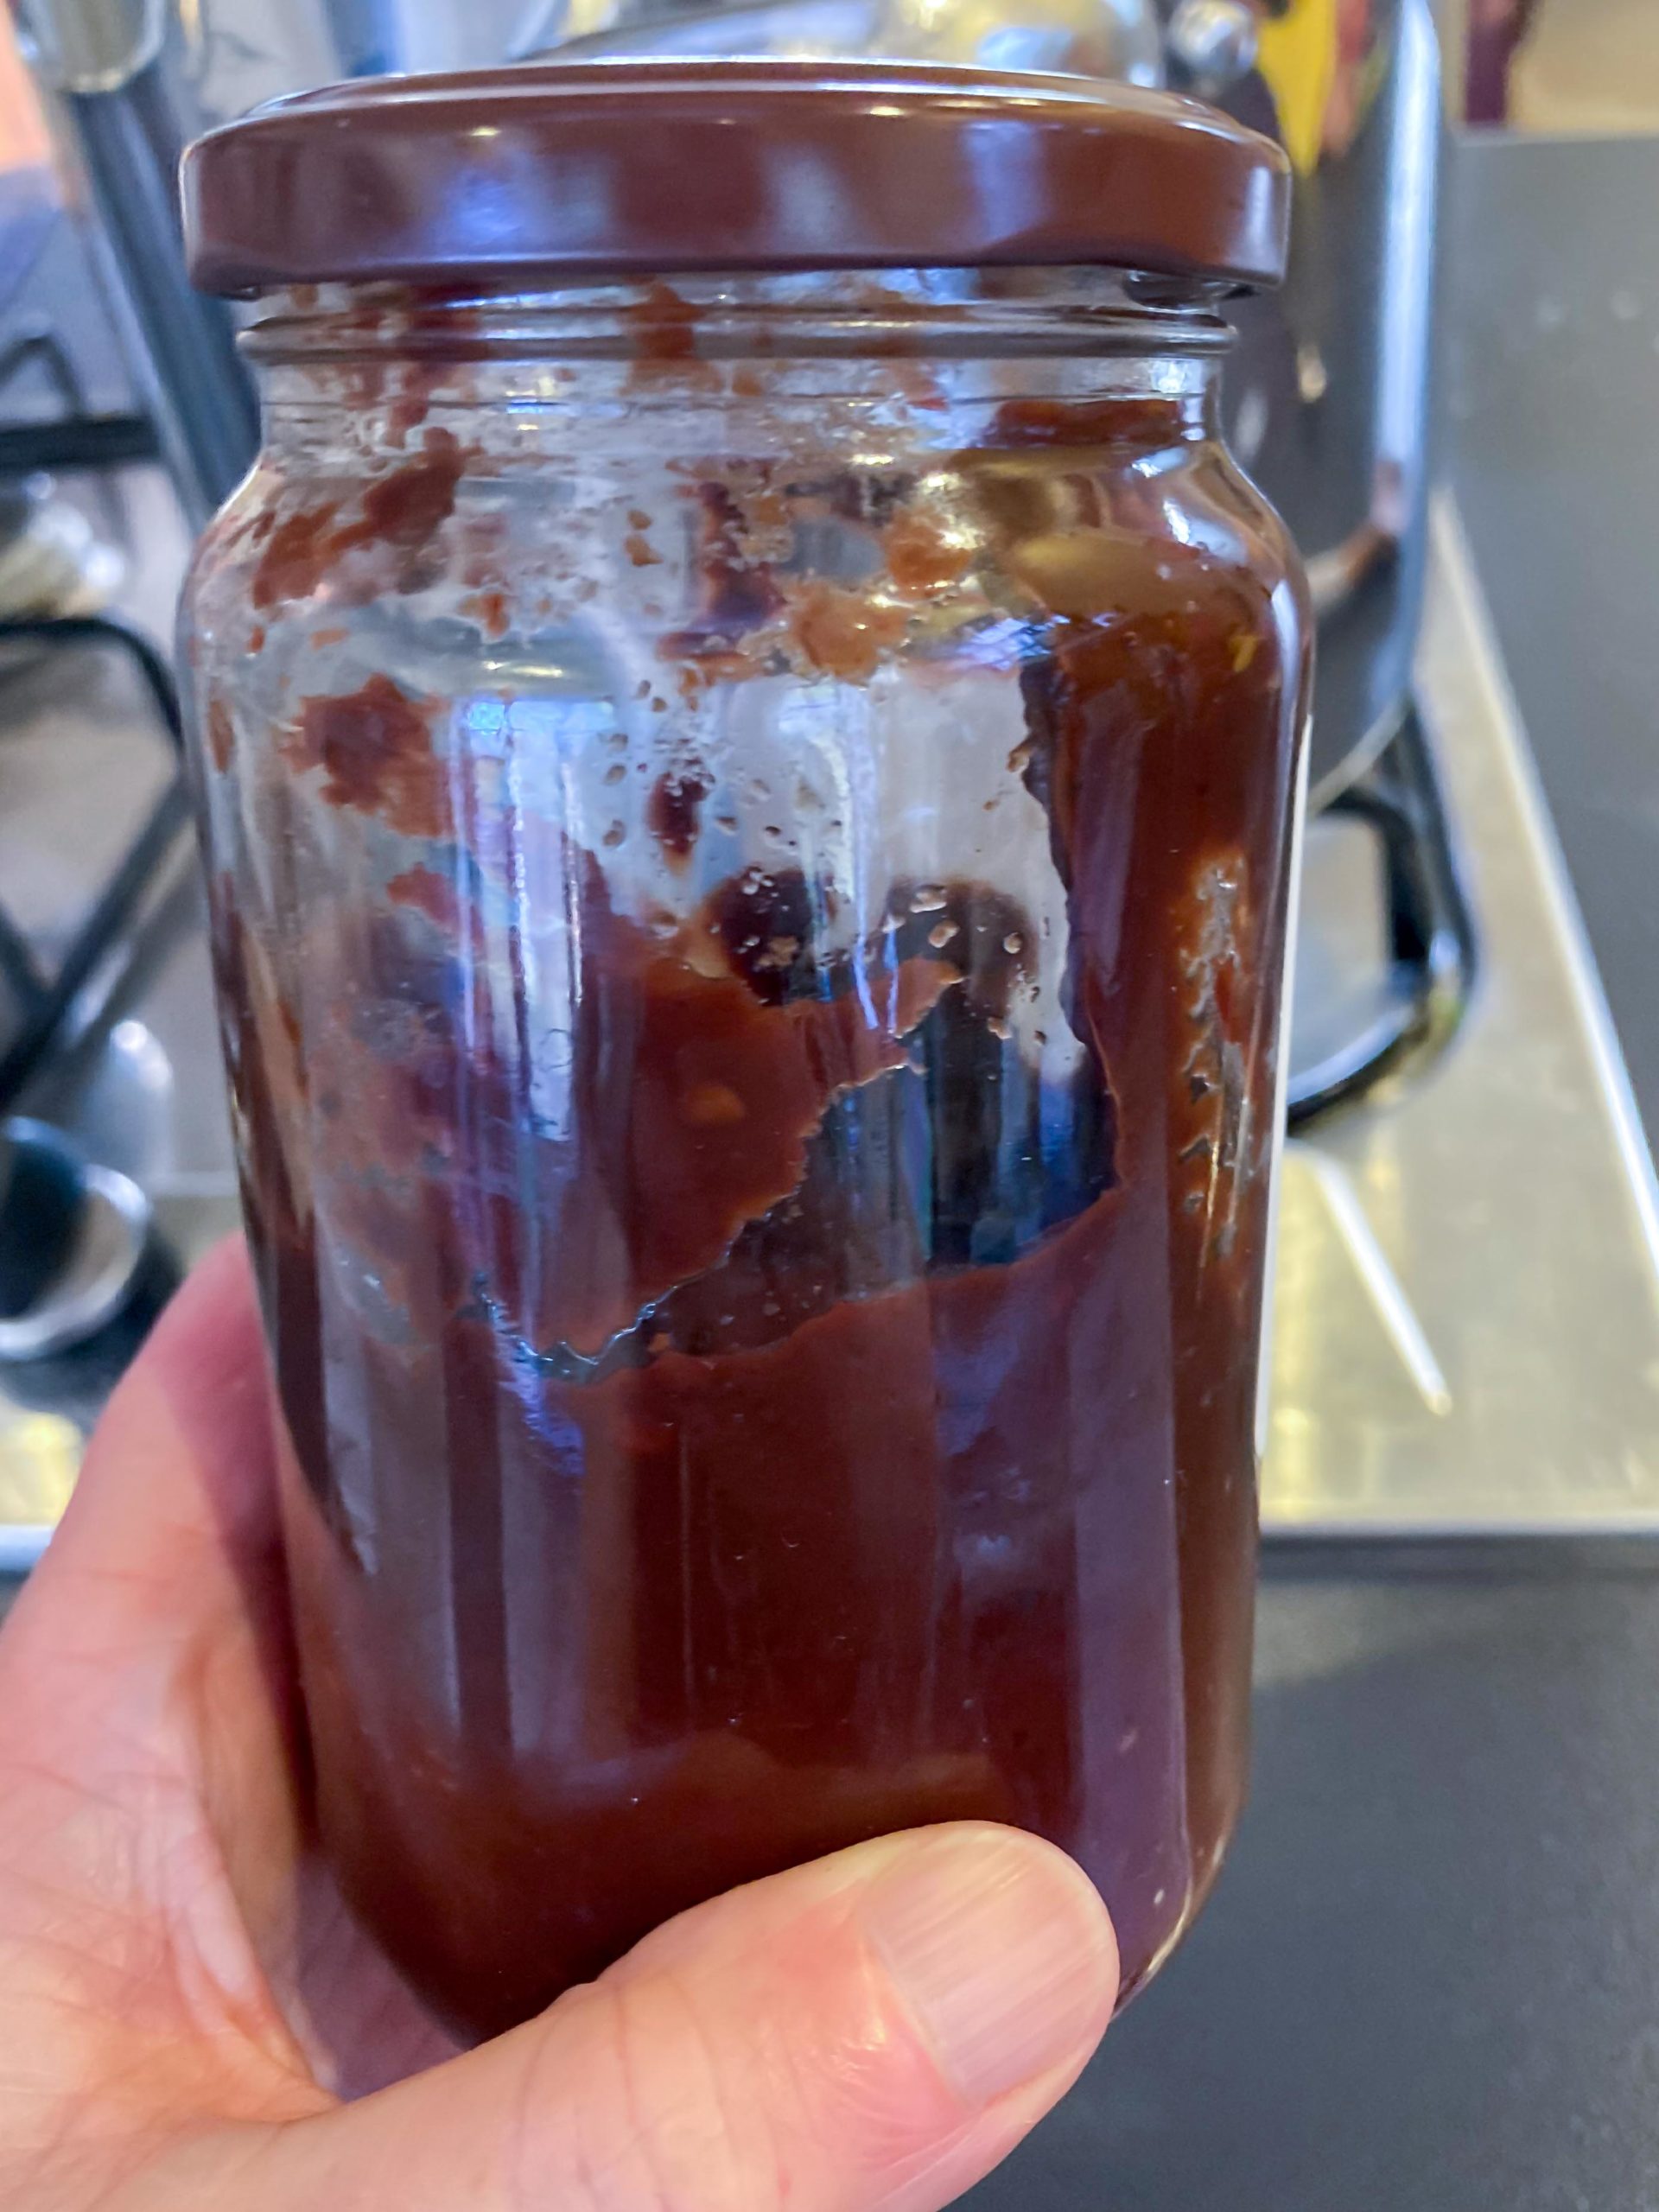 A hand holding a half-full jar of a red-brown sauce